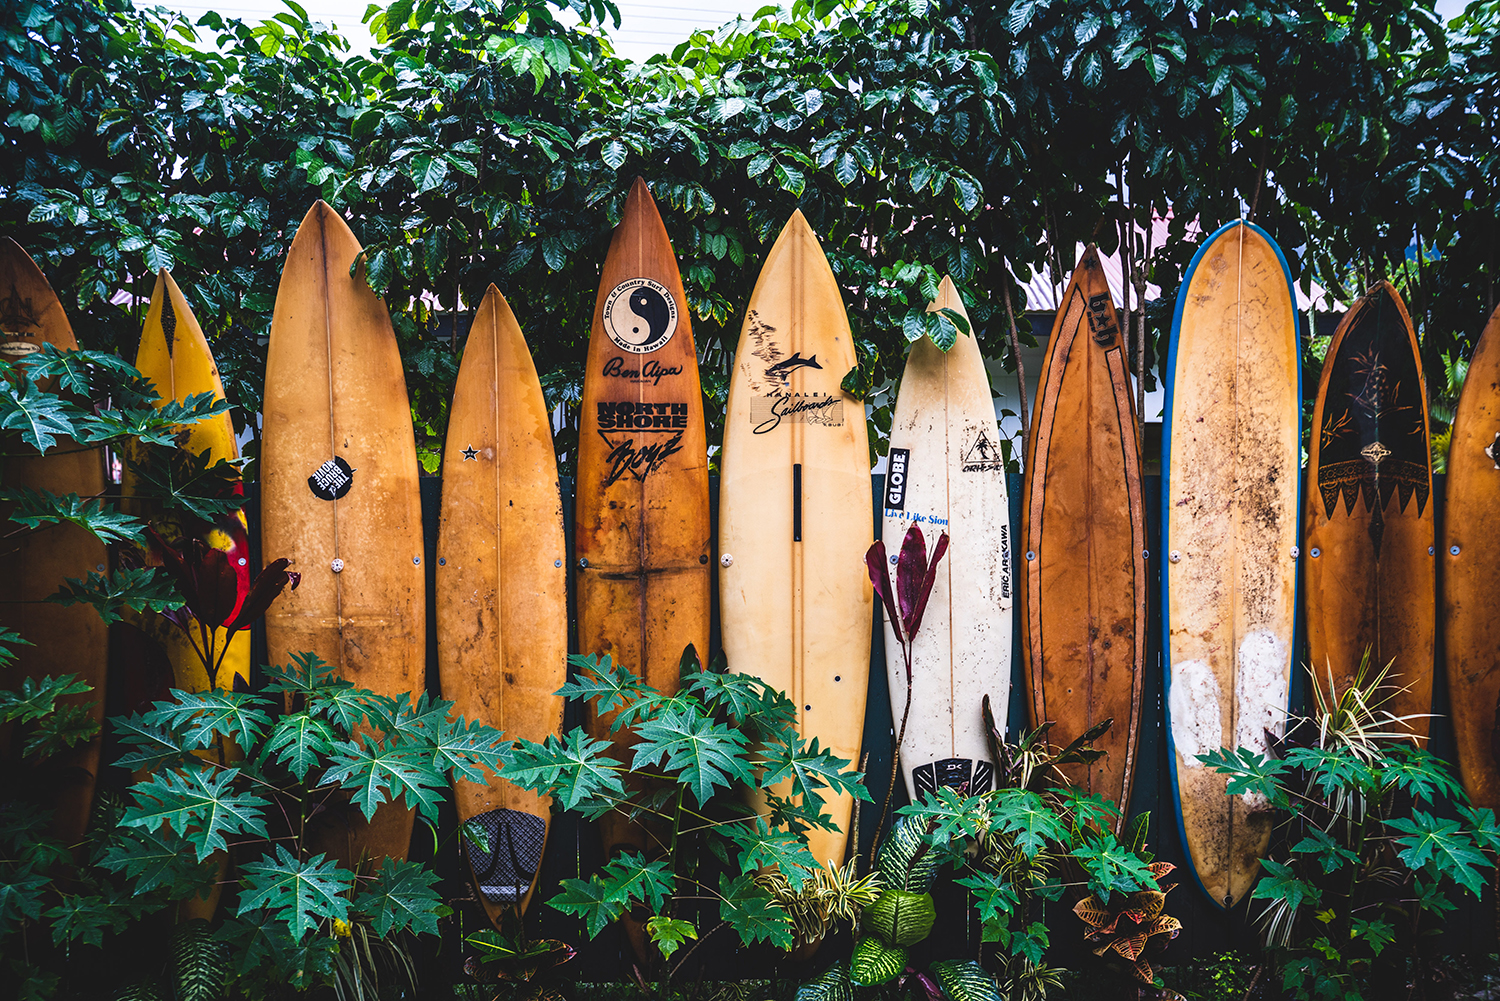 Row of surf boards standing up